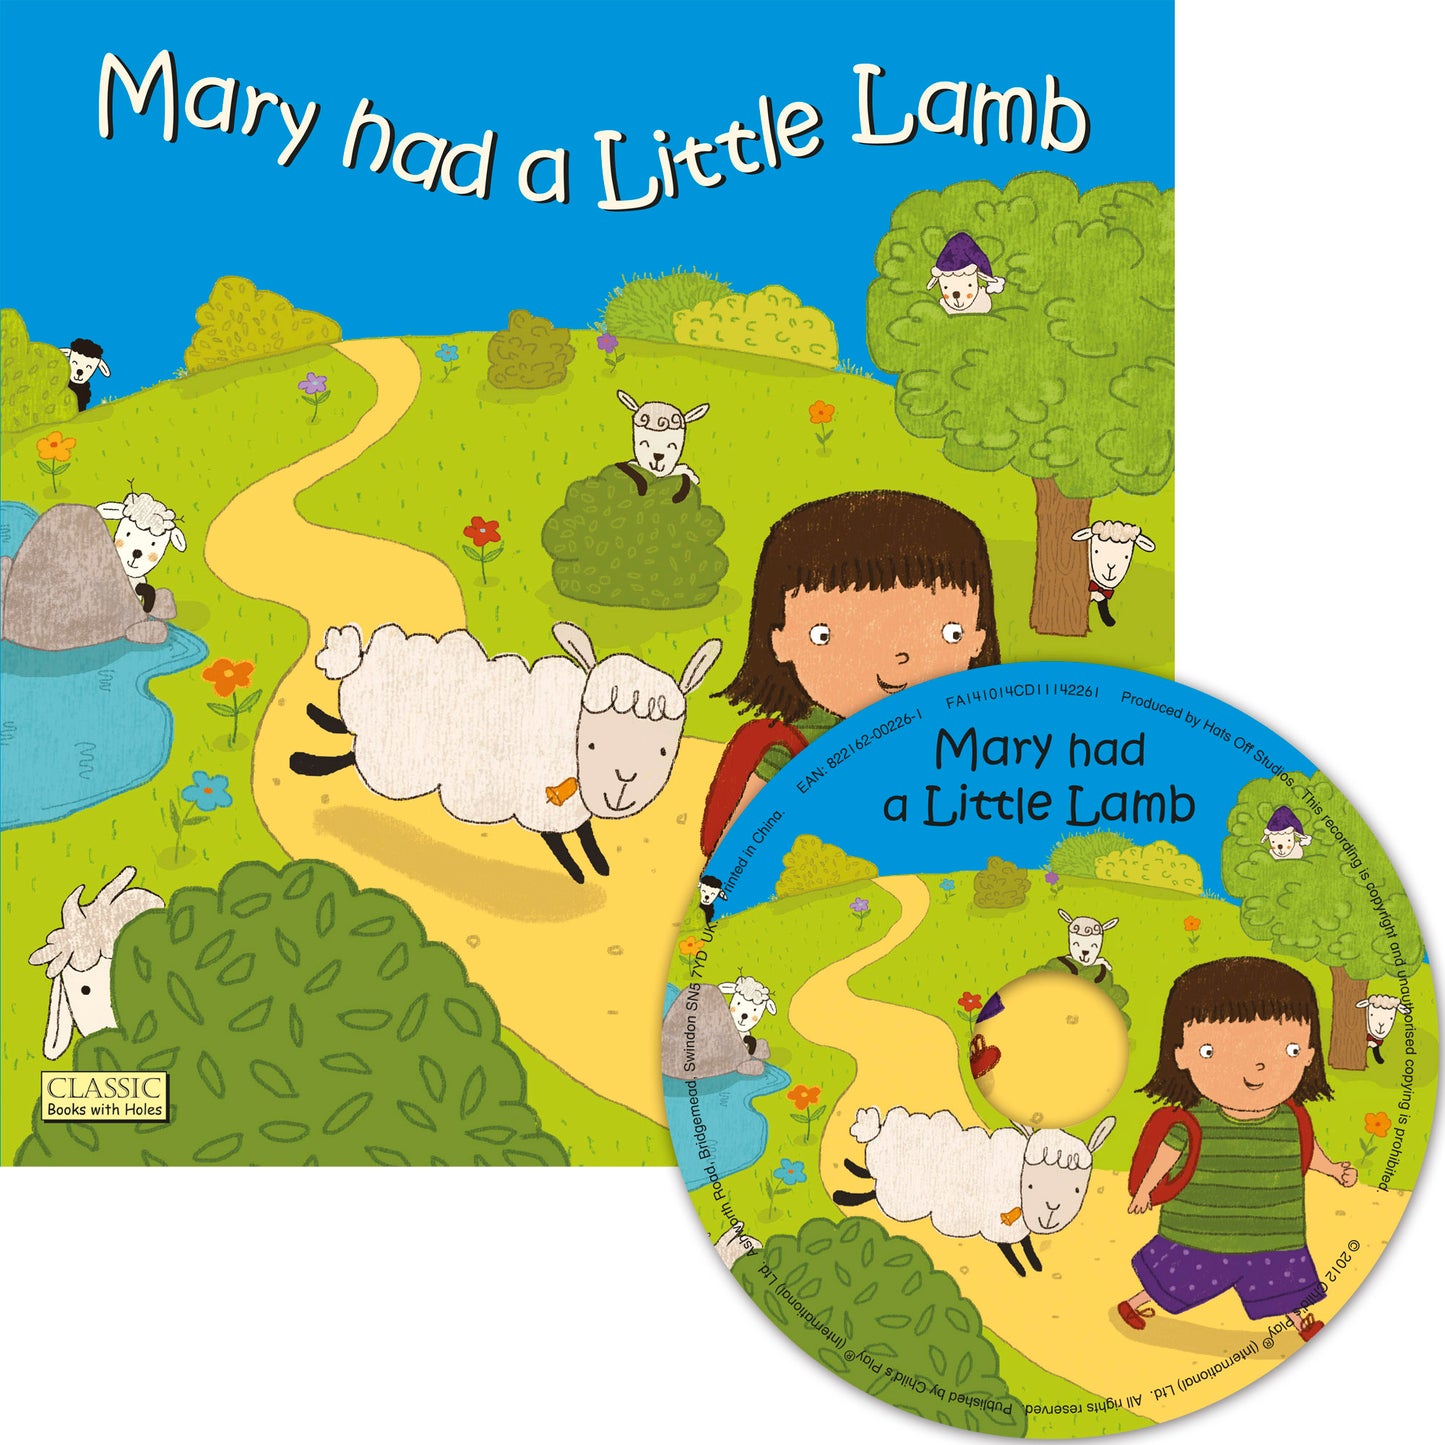 Mary had a Little Lamb (Softcover and CD Edition)